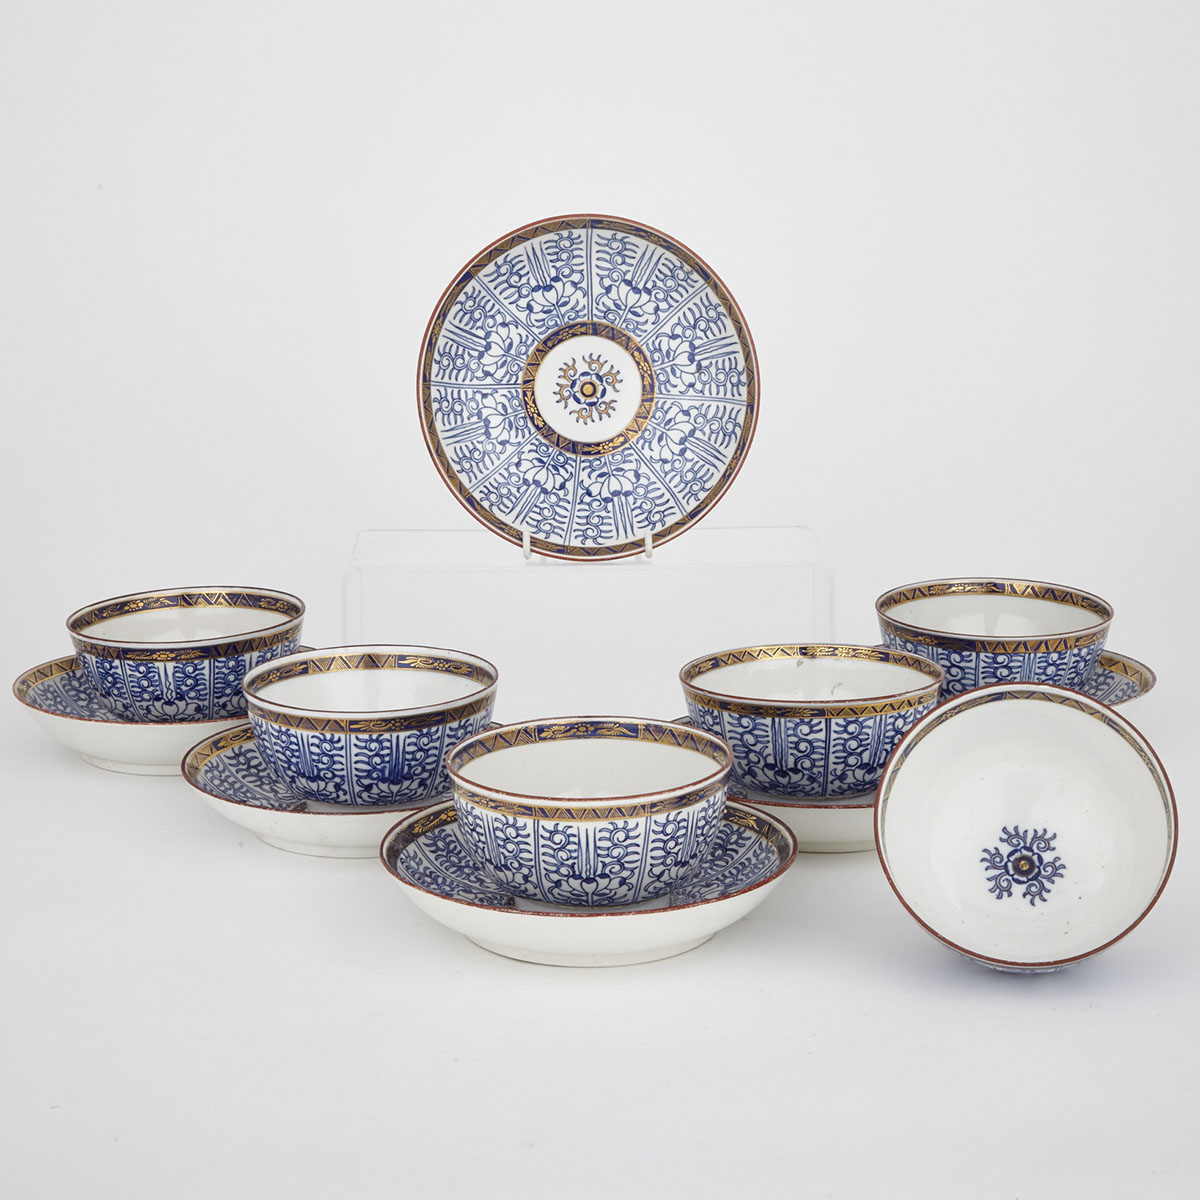 Six Worcester ‘Royal Lily’ Large Tea Bowls and Saucers, late 18th century